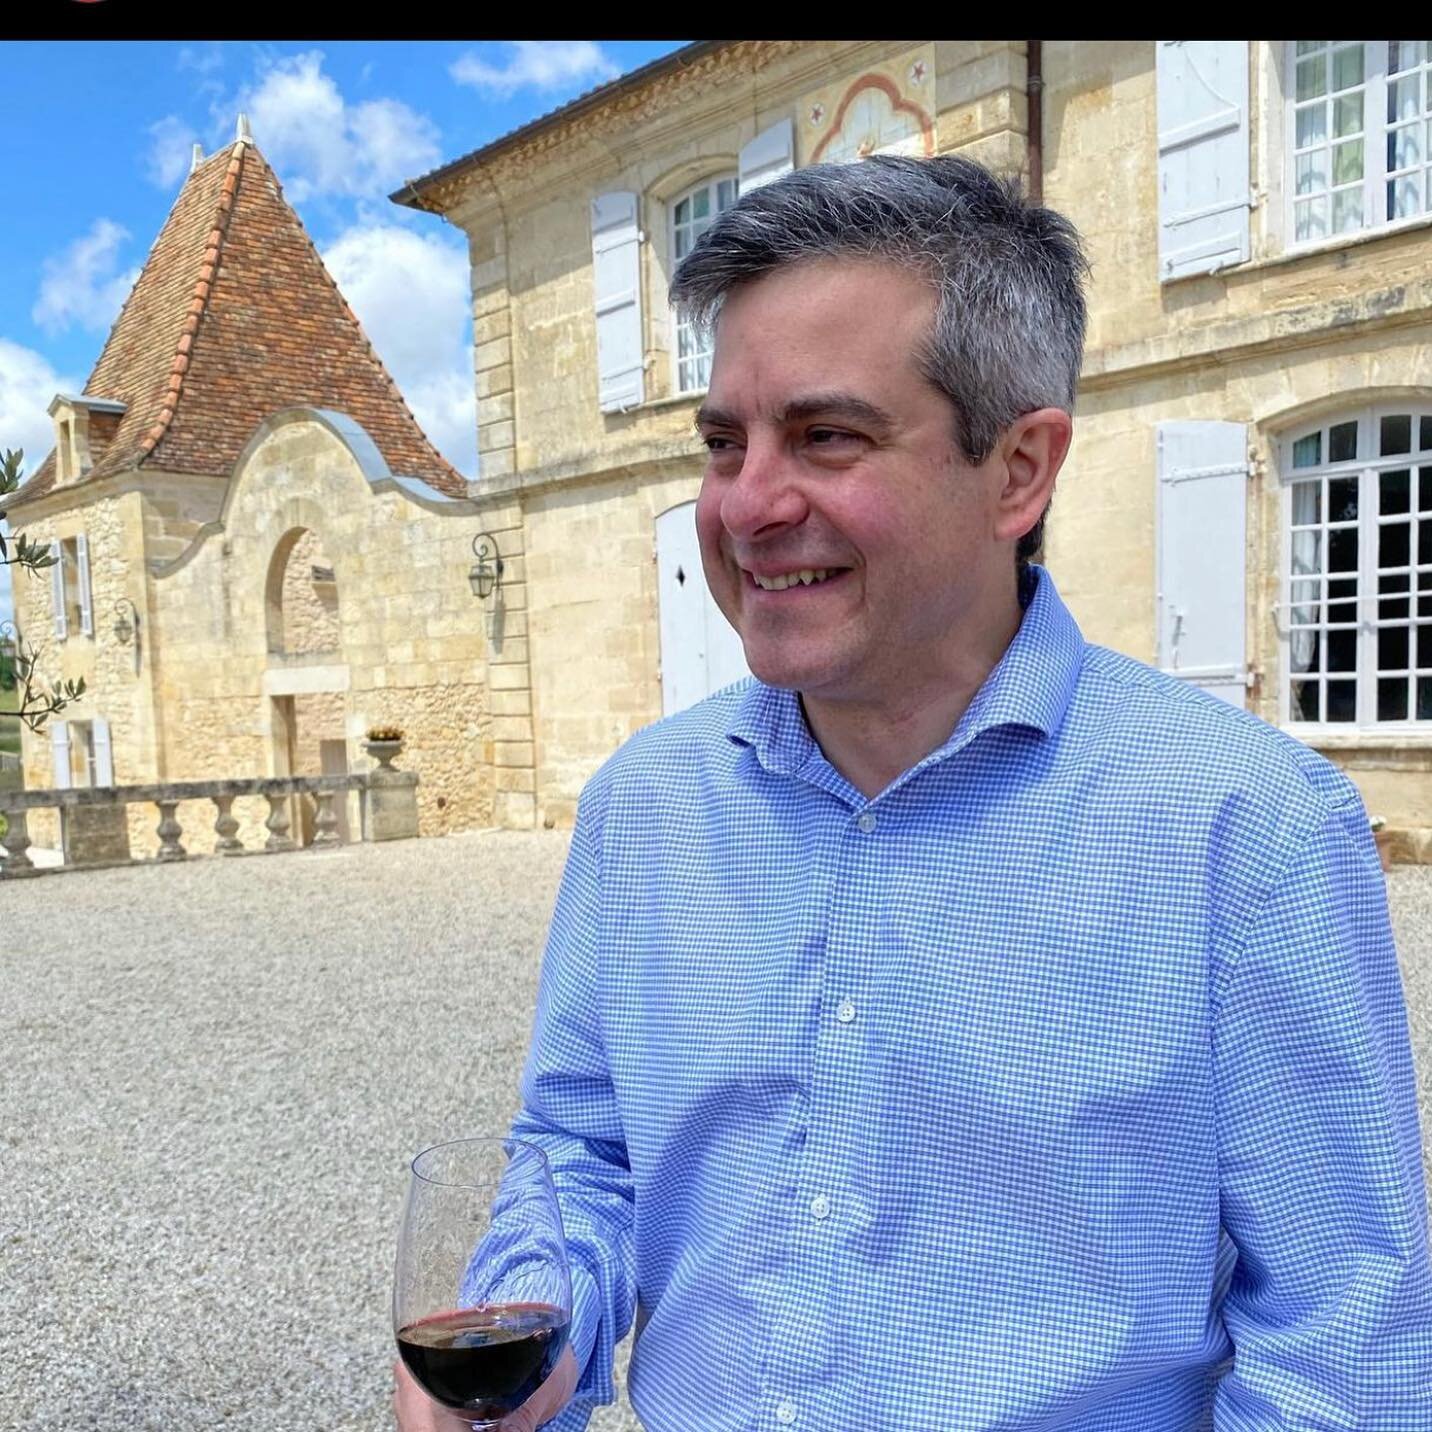 Congratulations to seventh-generation Vigneron Nicolas Seillan who was recently named Winemaker at @chateaulassegue, a beautiful and historic estate in Saint-Emilion, Bordeaux.